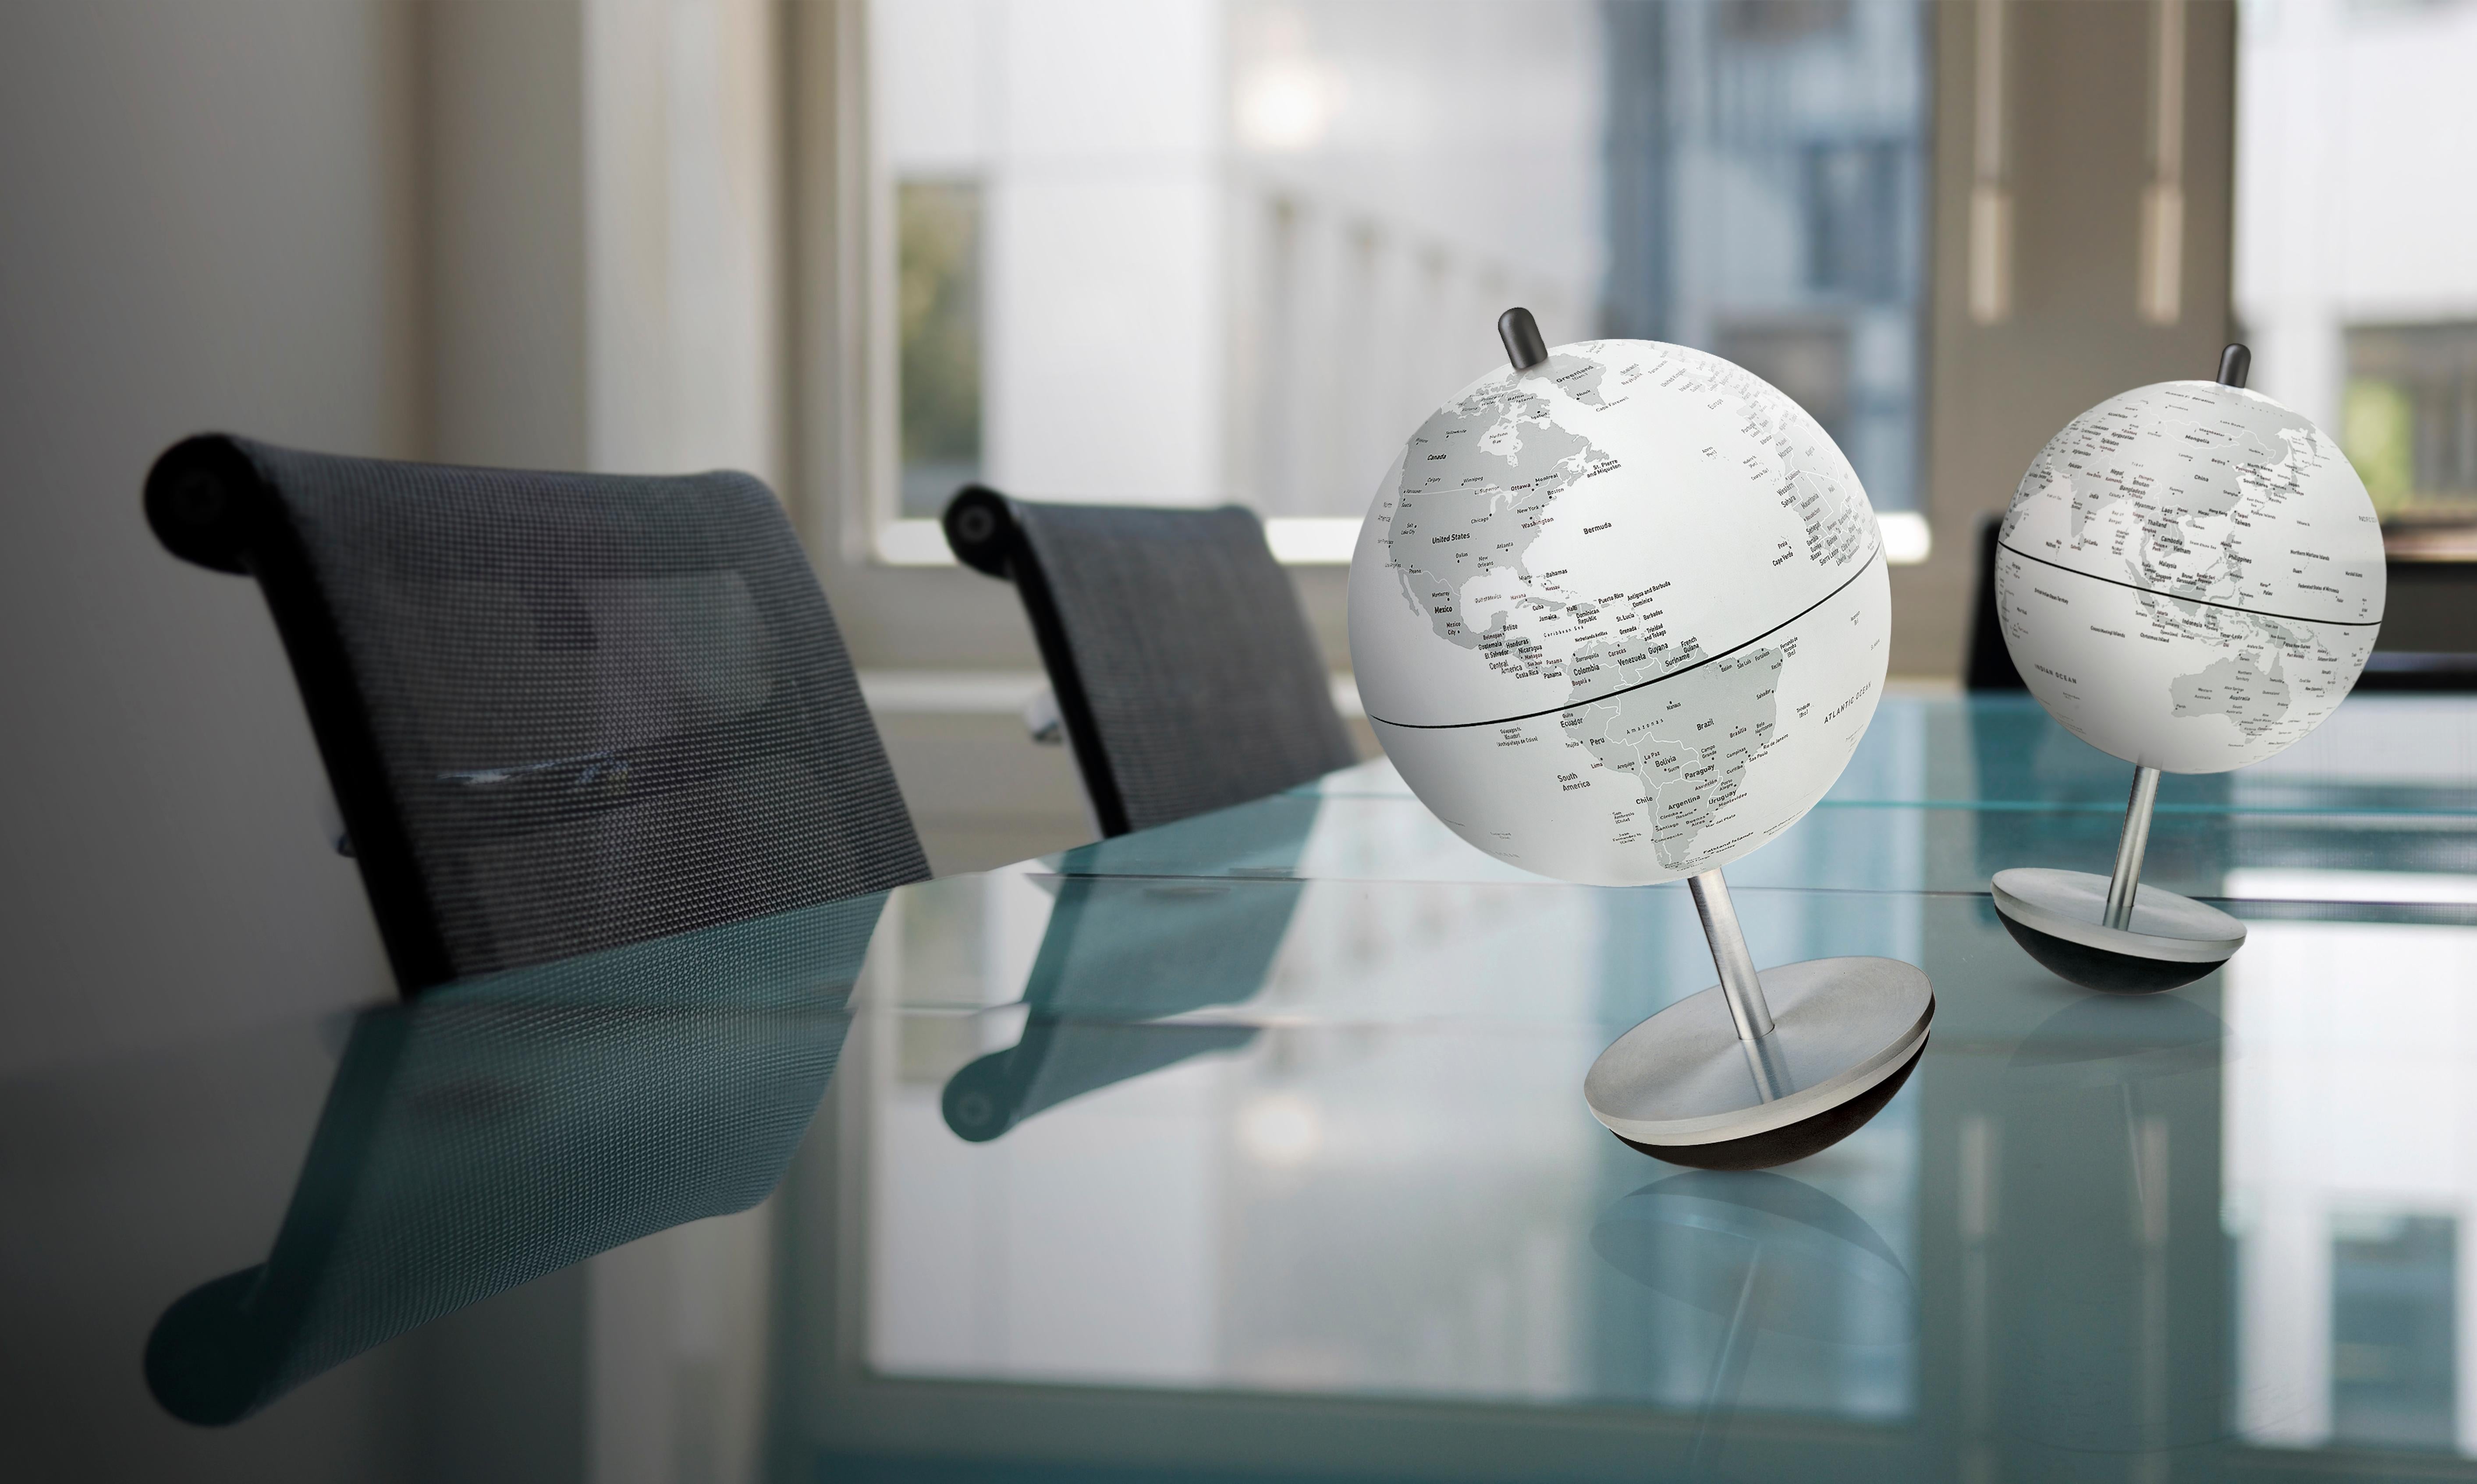 Atmosphere's Swing Globes are far from the traditional globes found in history class. Made from aluminum with a rubber self-righting base, this Globe has been specially fabricated to really get into the swing of things. Its chic white gray color